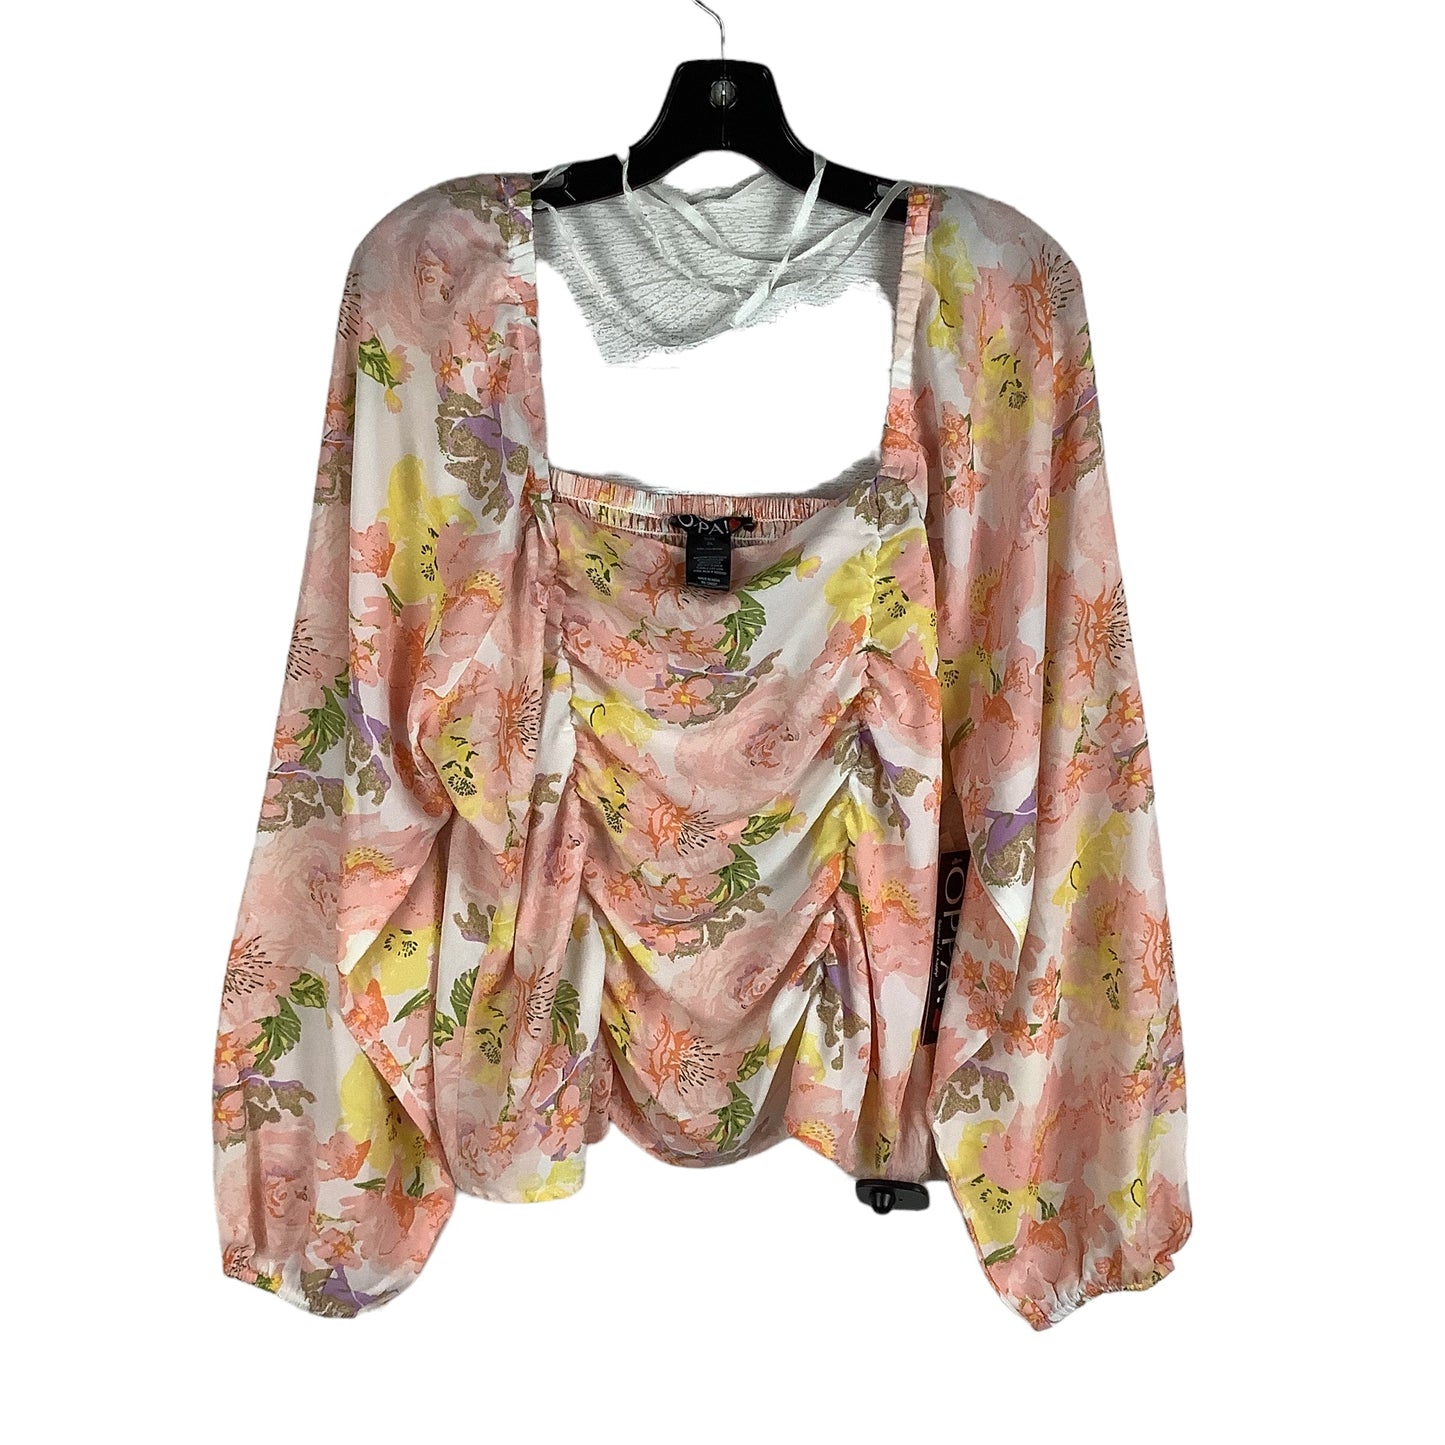 Floral Print Top Long Sleeve Clothes Mentor, Size 2x